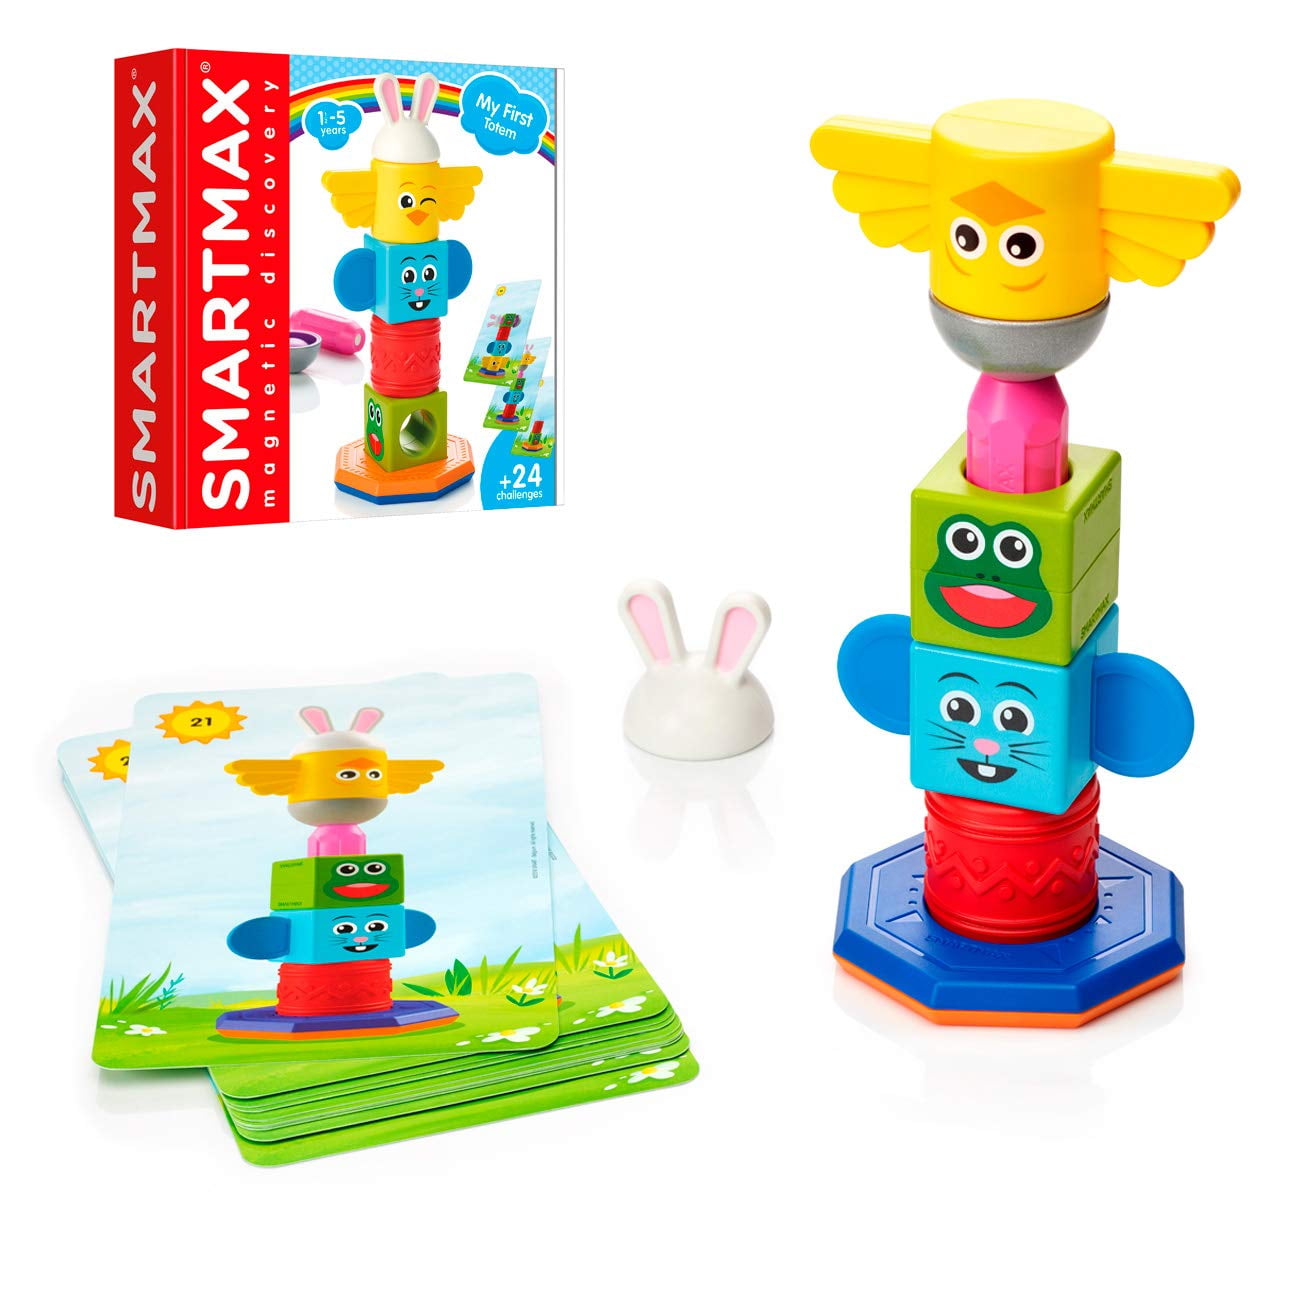 SmartMax My First Totem STEM Magnetic Discovery Building Game Ages 1-5 ...